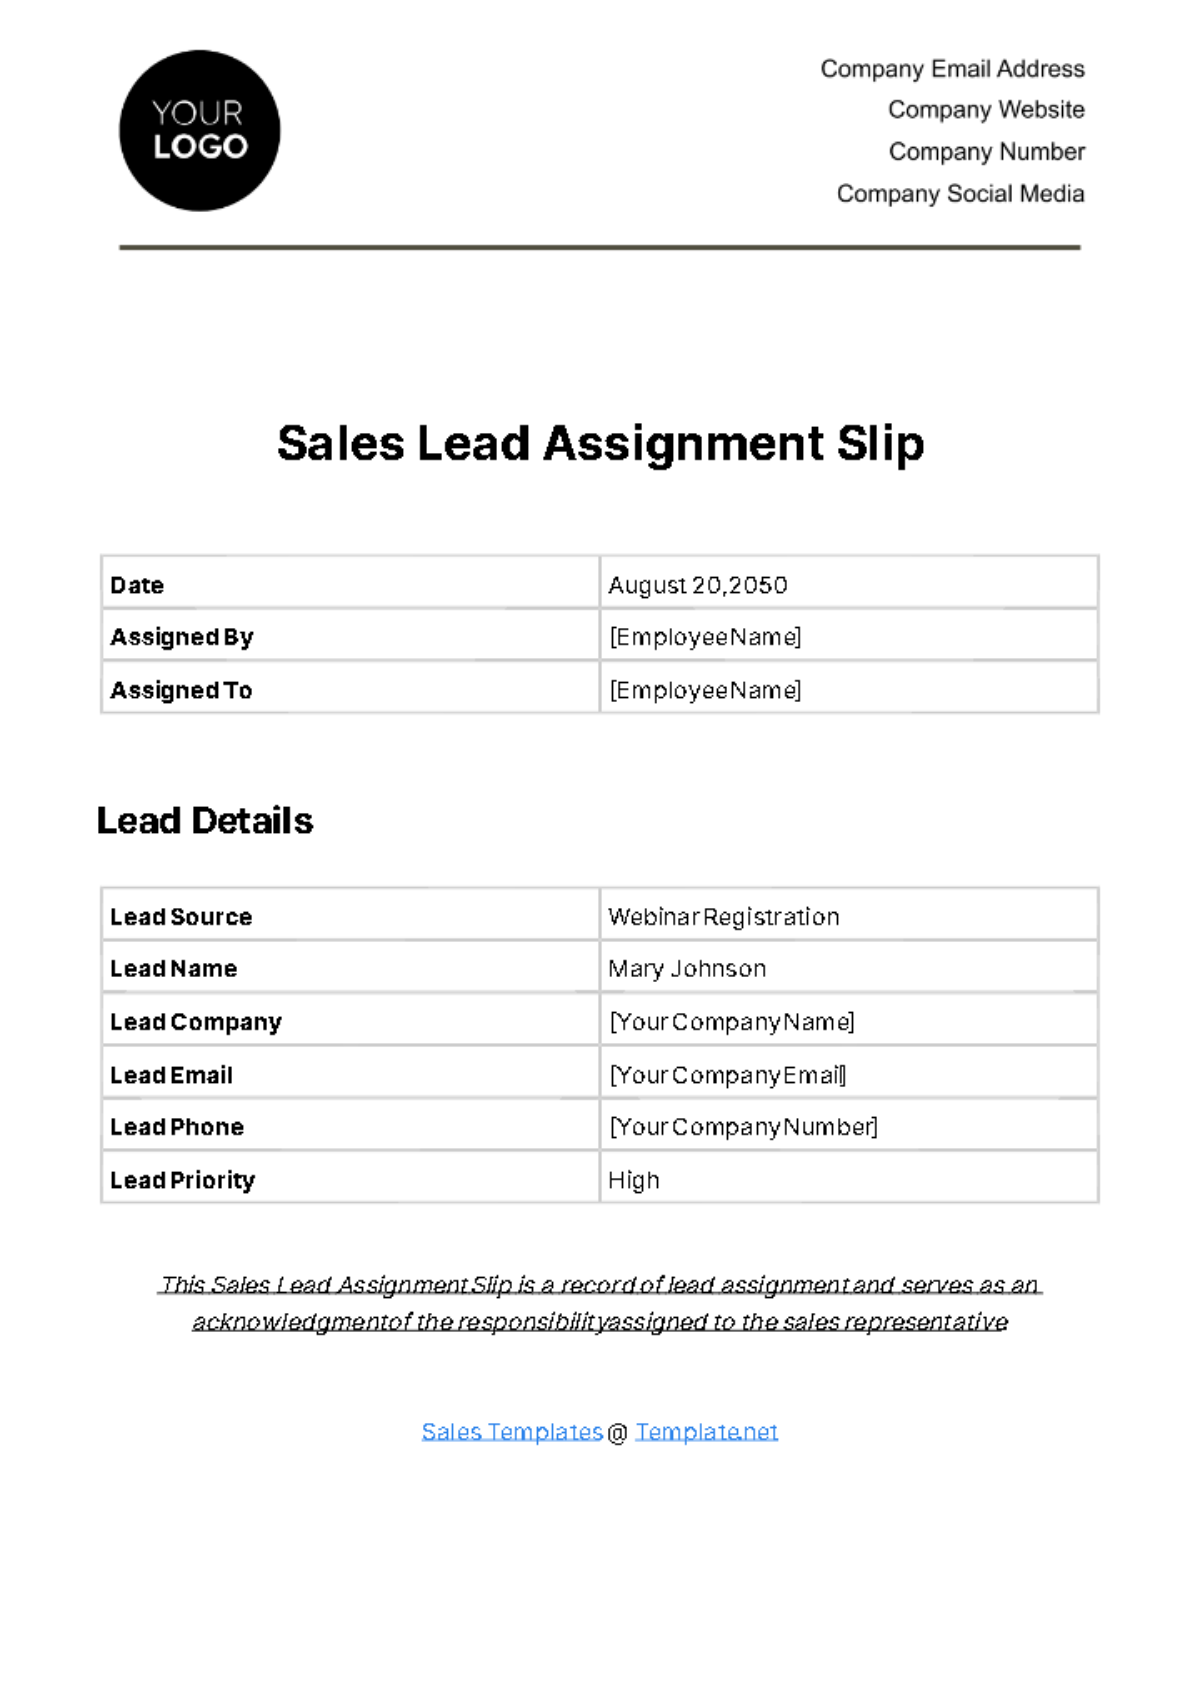 Free Sales Lead Assignment Slip Template